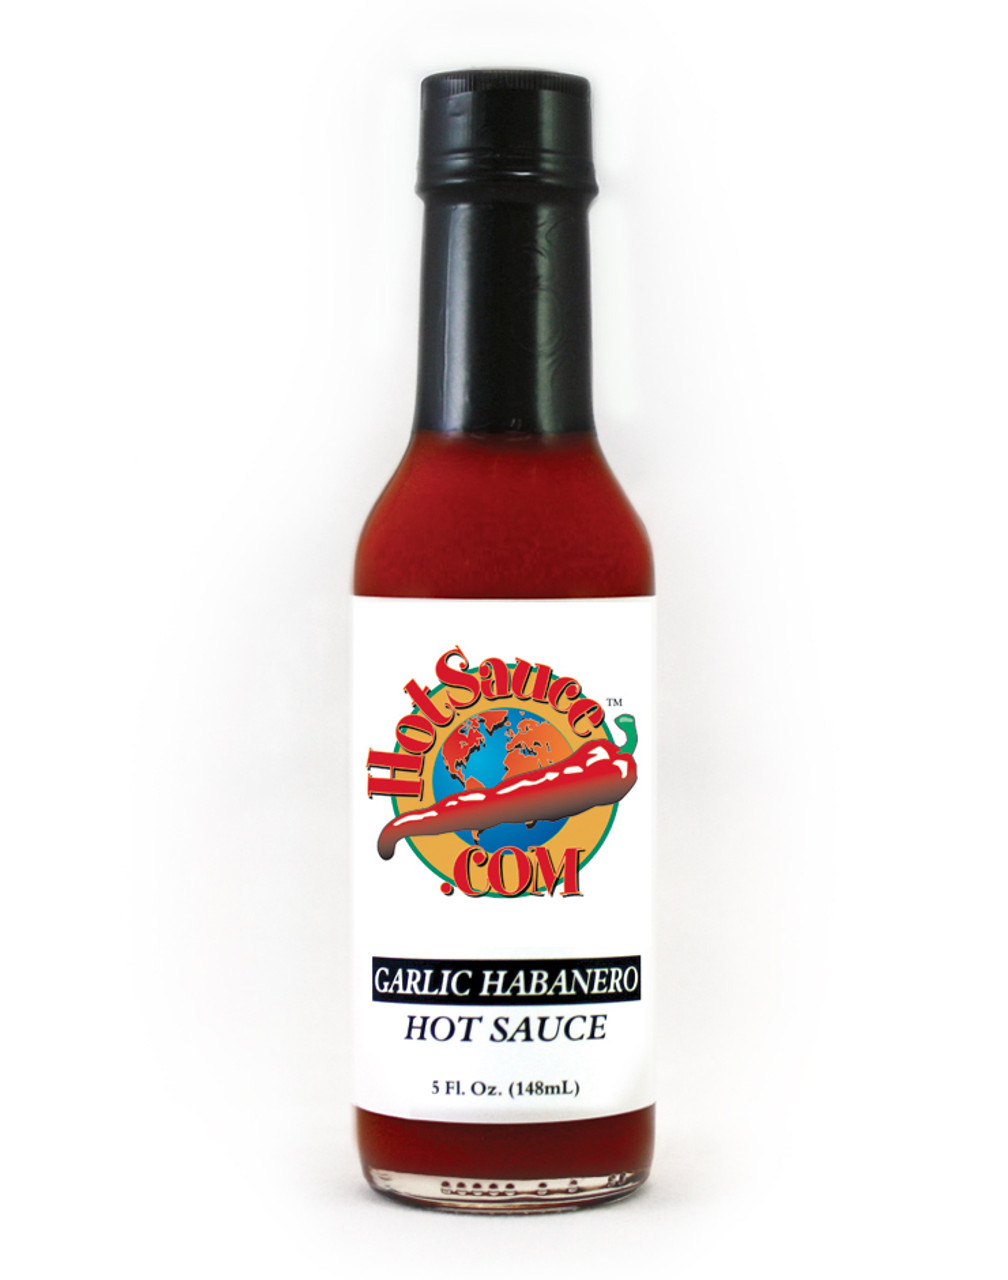 Private Selection® Fresno Chile Culinary Hot Sauce, 6.25 fl oz